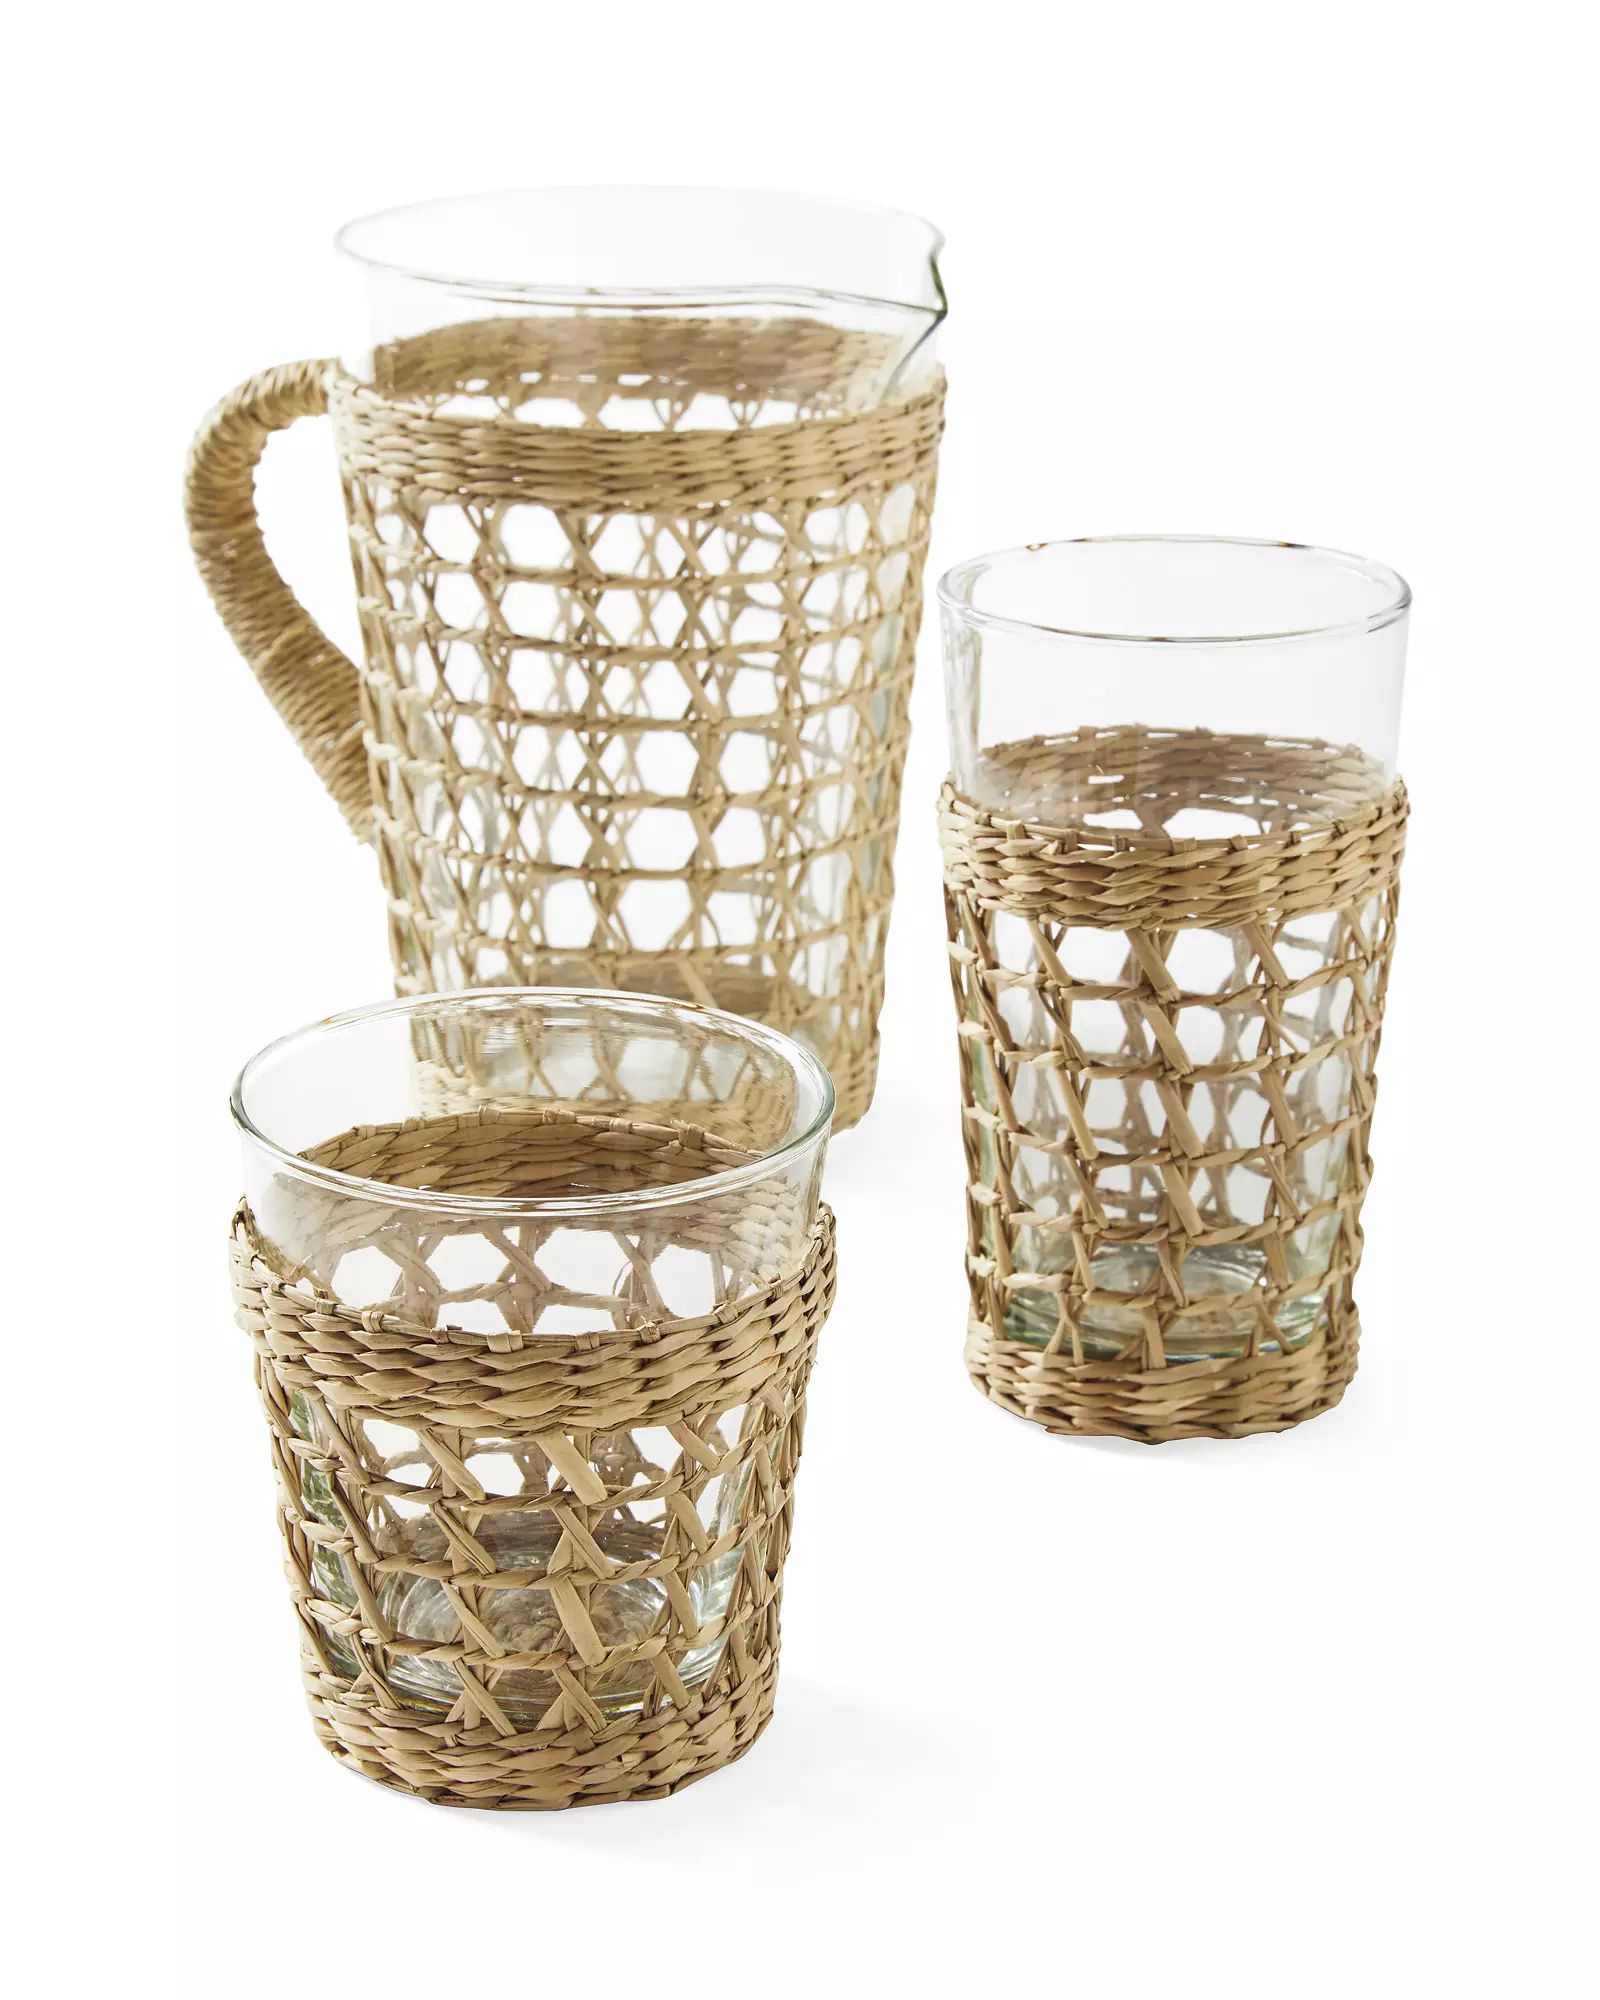 Cayman Seagrass-Wrapped Pitcher | Serena and Lily